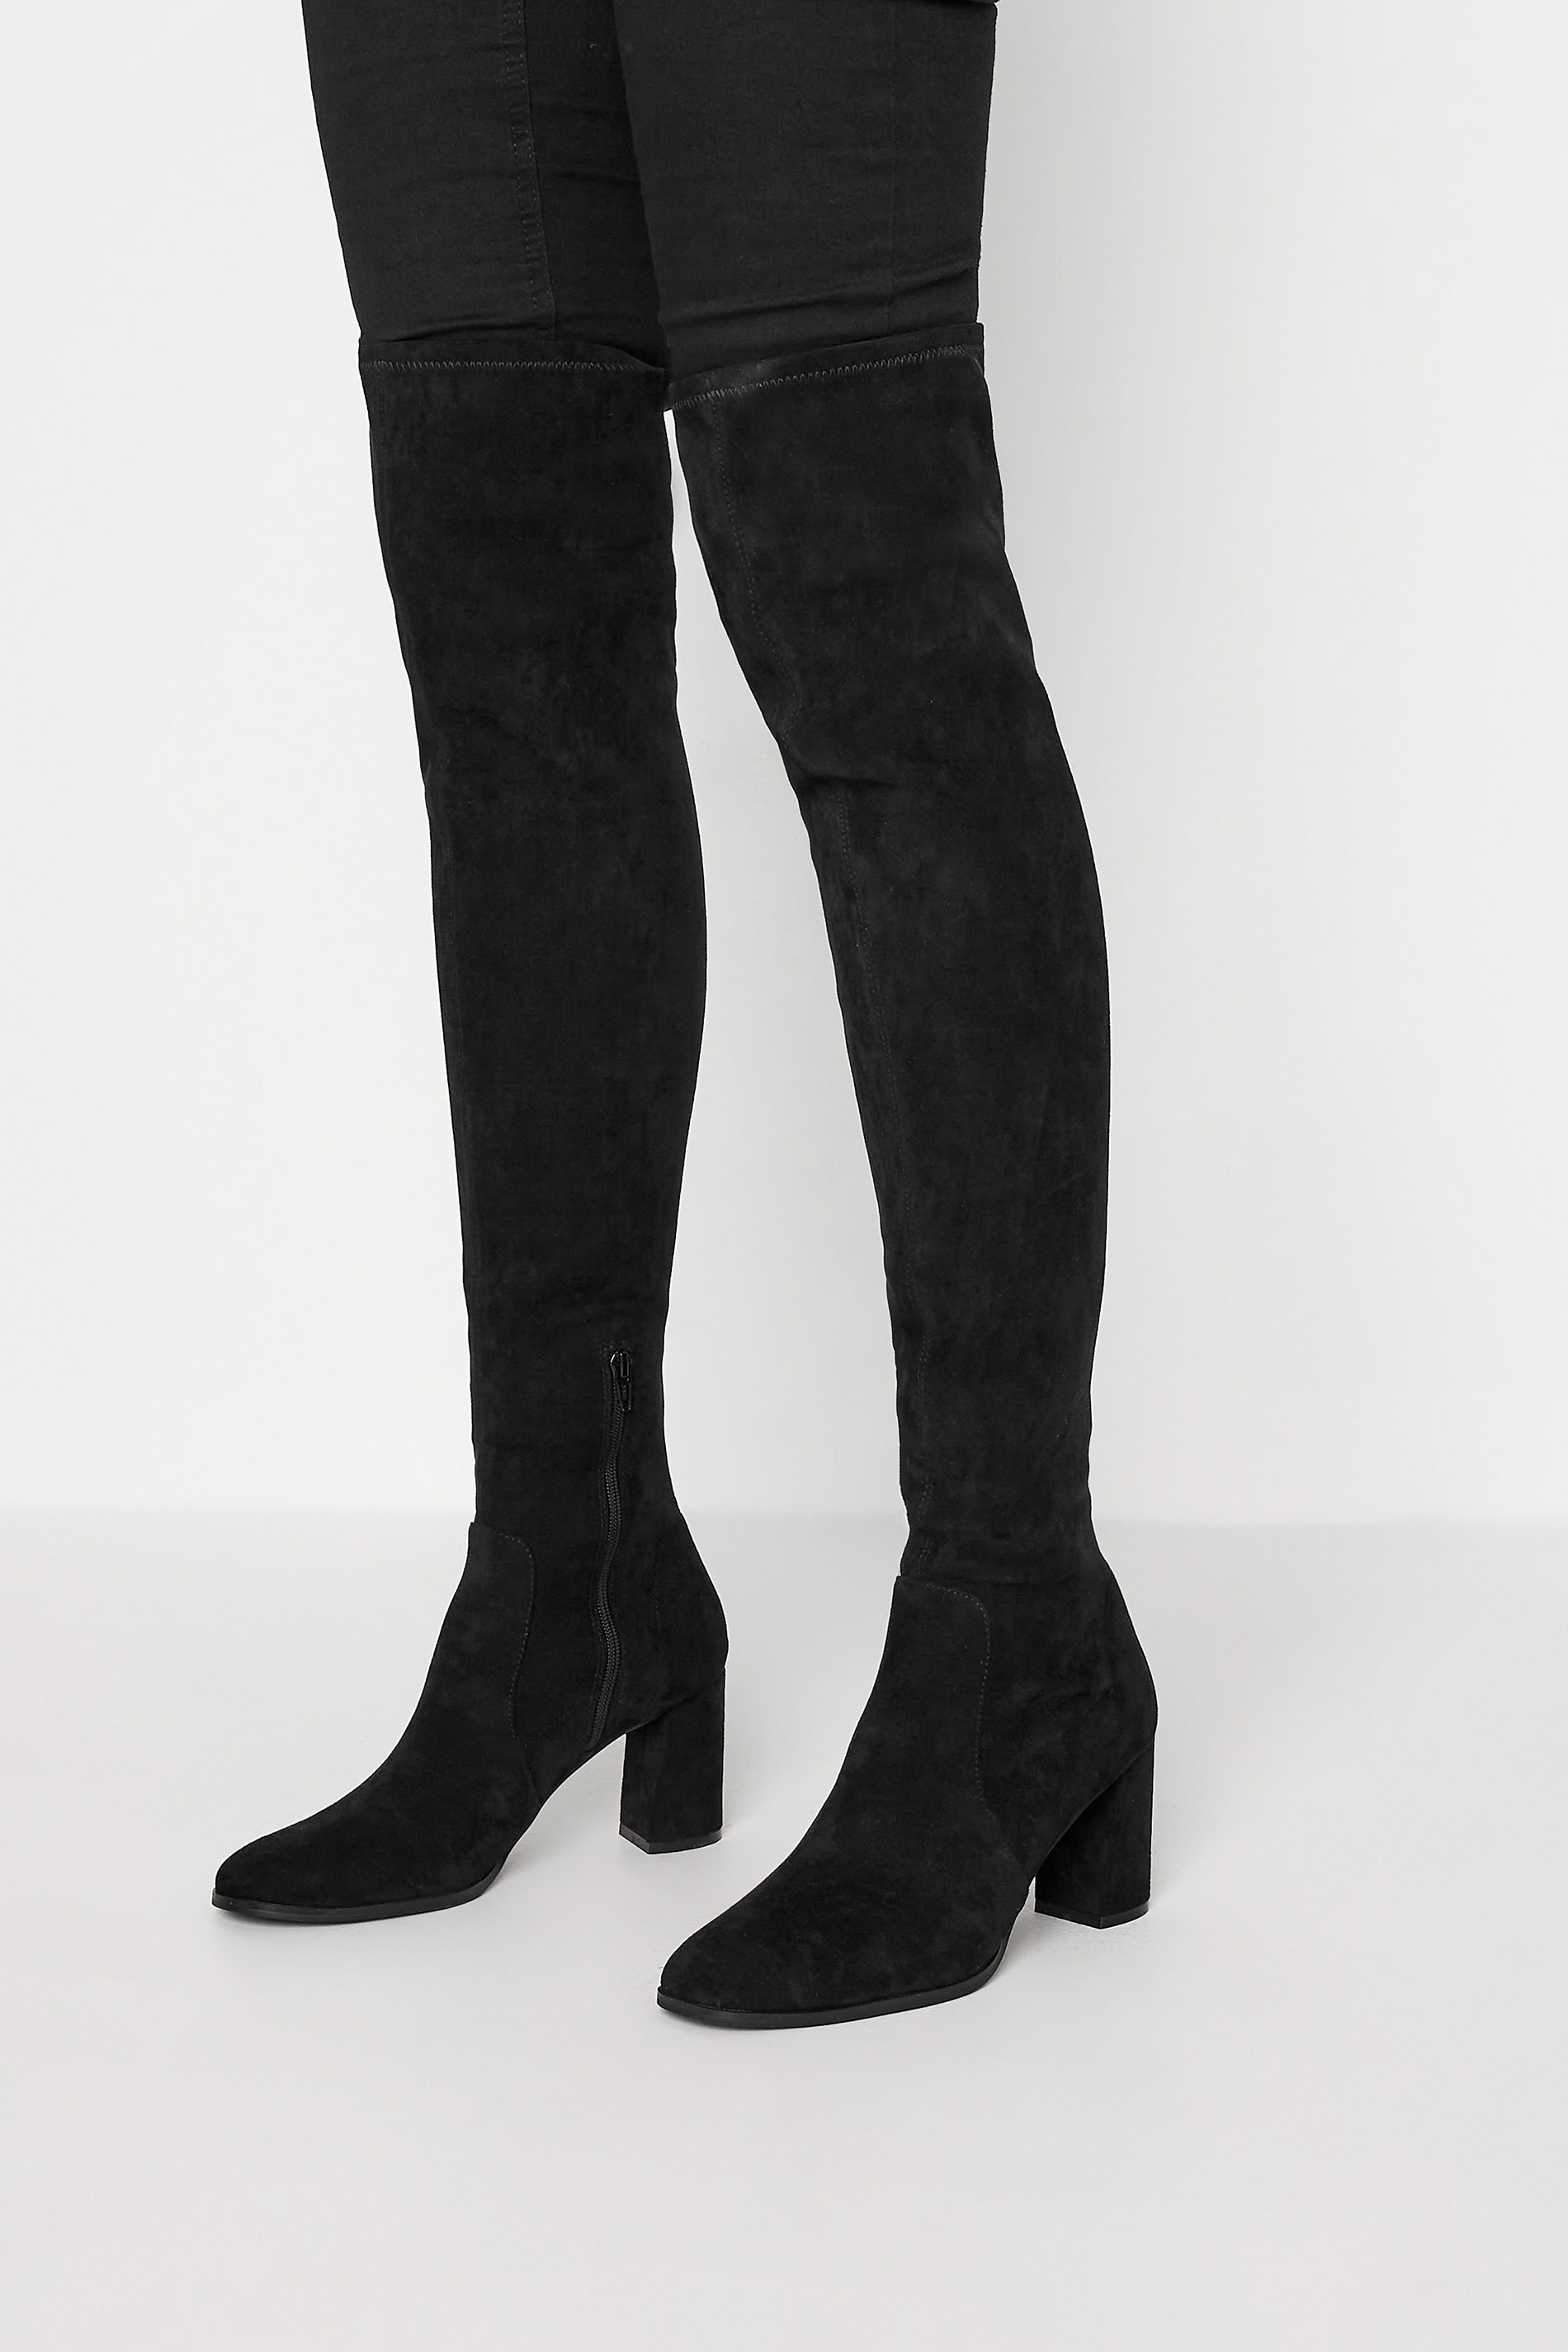 LTS Black Suede Heeled Over The Knee Boots In Standard Fit | Long Tall Sally 1